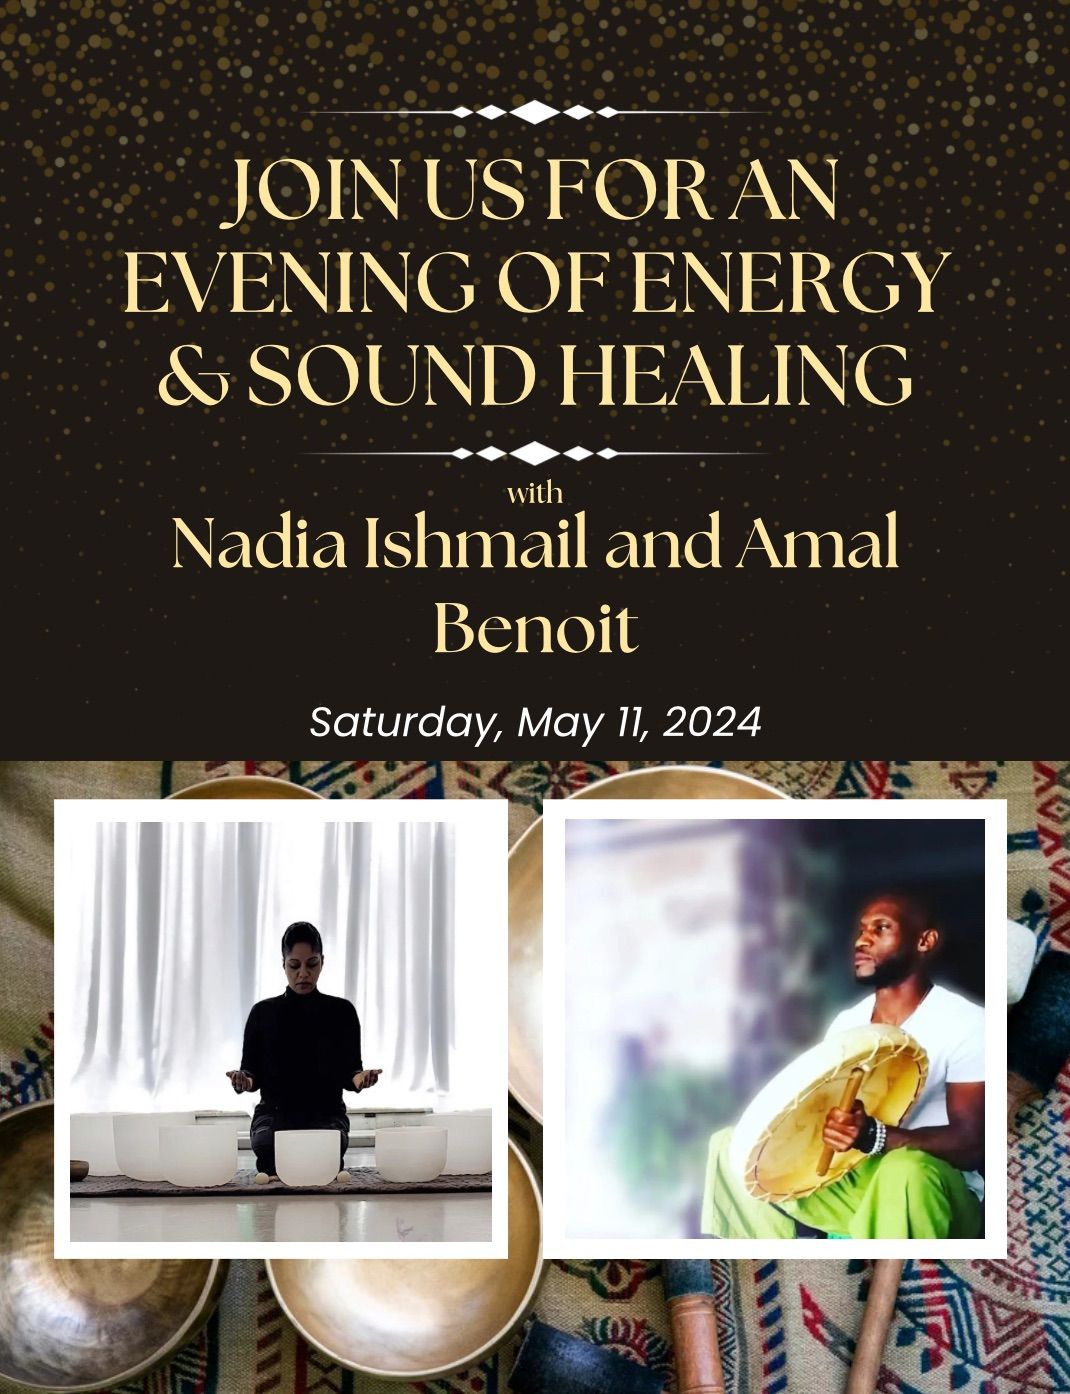 Energy and Sound Healing